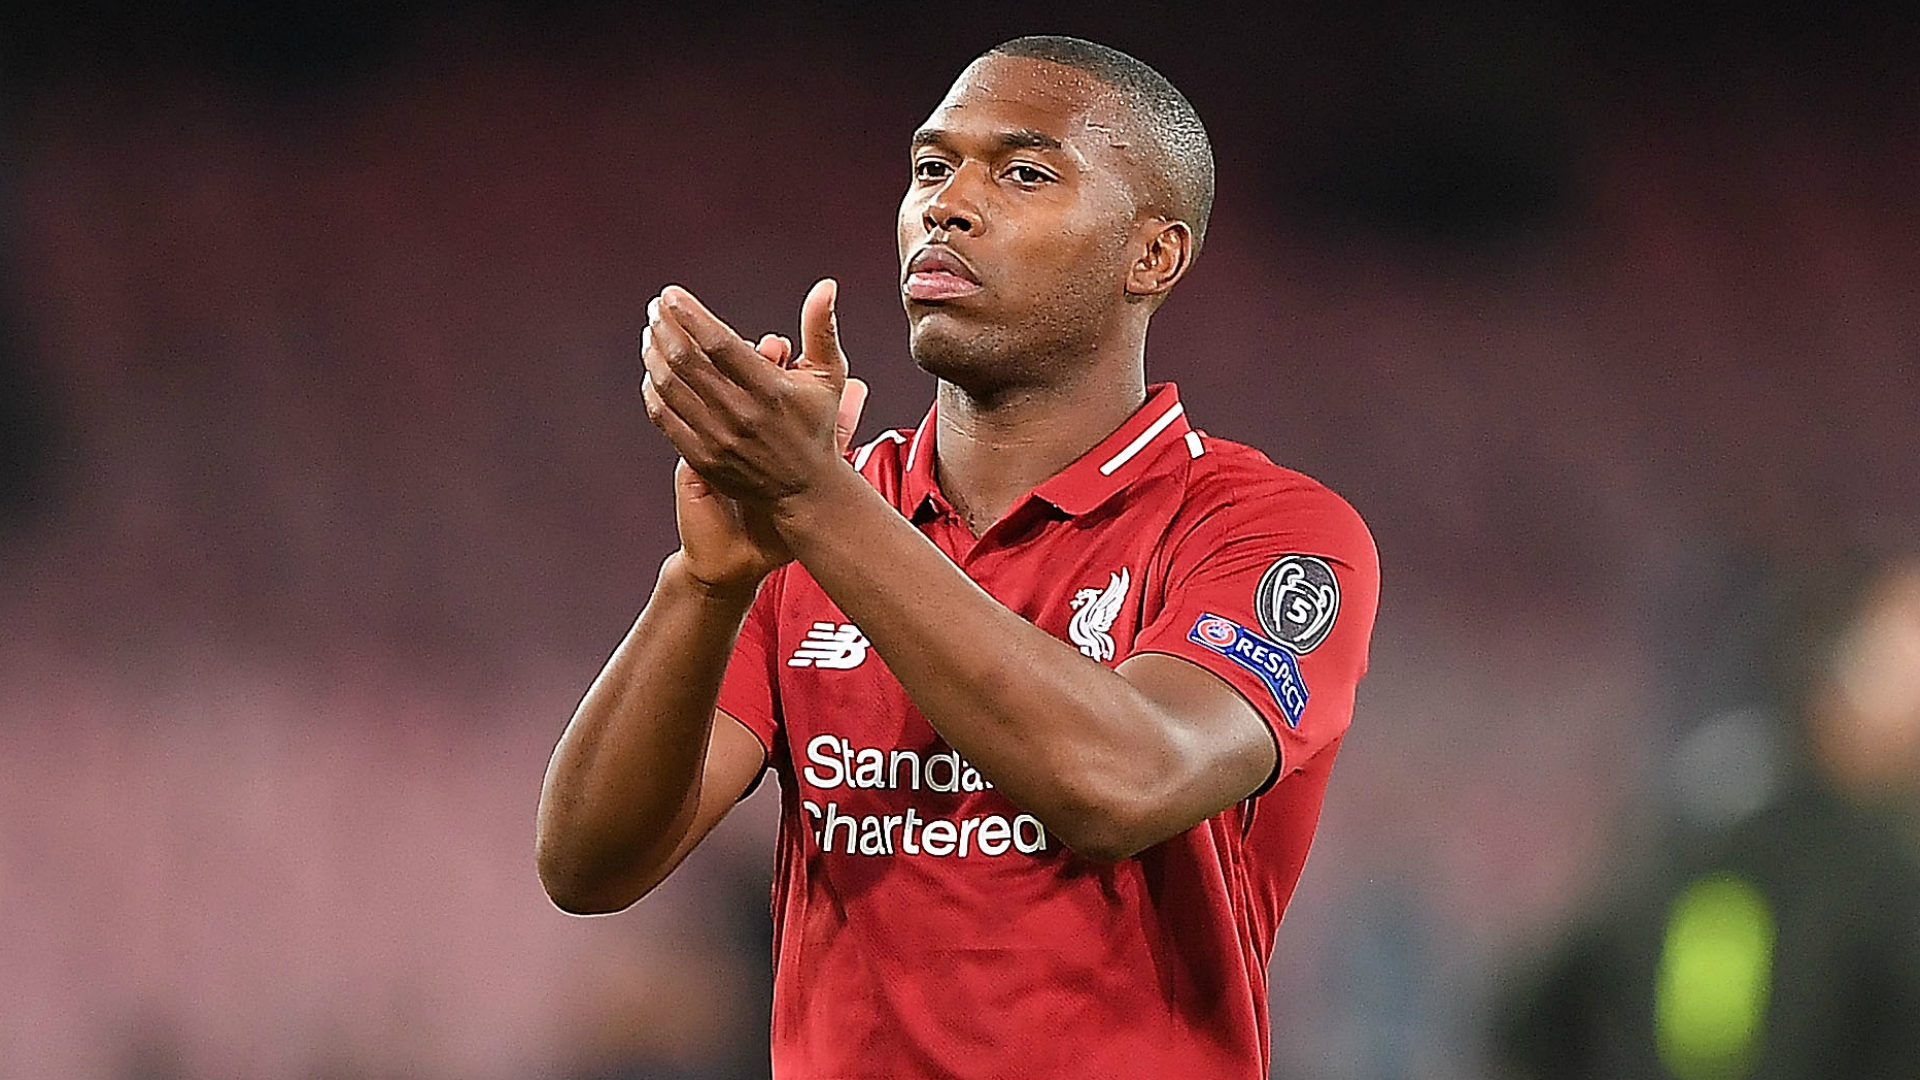 Perth Glory signs Sturridge in stunning coup